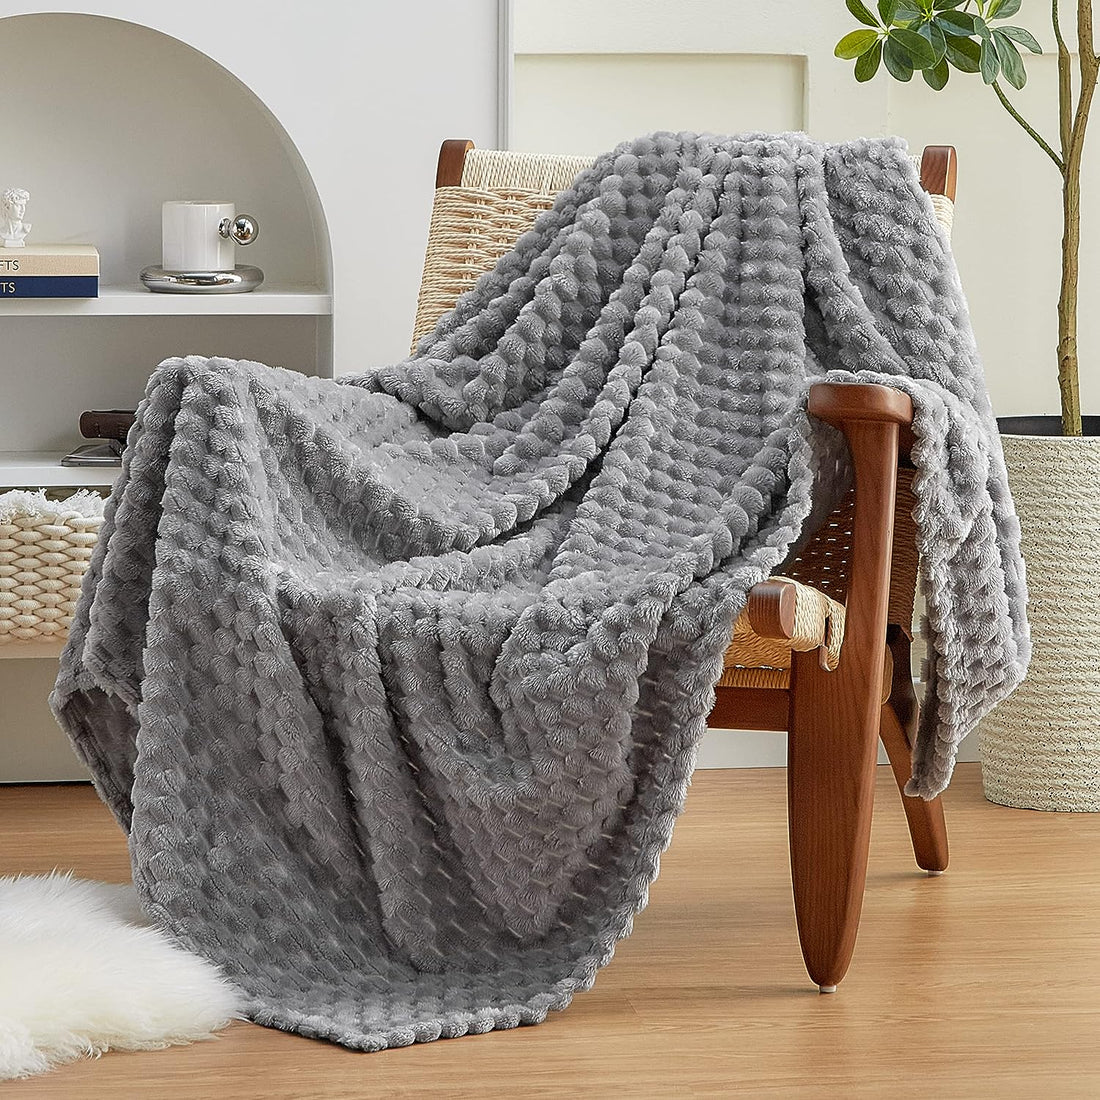 Fleece Throw Blanket for Couch or Bed - 3D Imitation Turtle Shell Jacquard Decorative Blankets - Cozy Soft Lightweight Fuzzy Flannel Blanket Suitable for All Seasons(50&quot;×60&quot;,Beige)